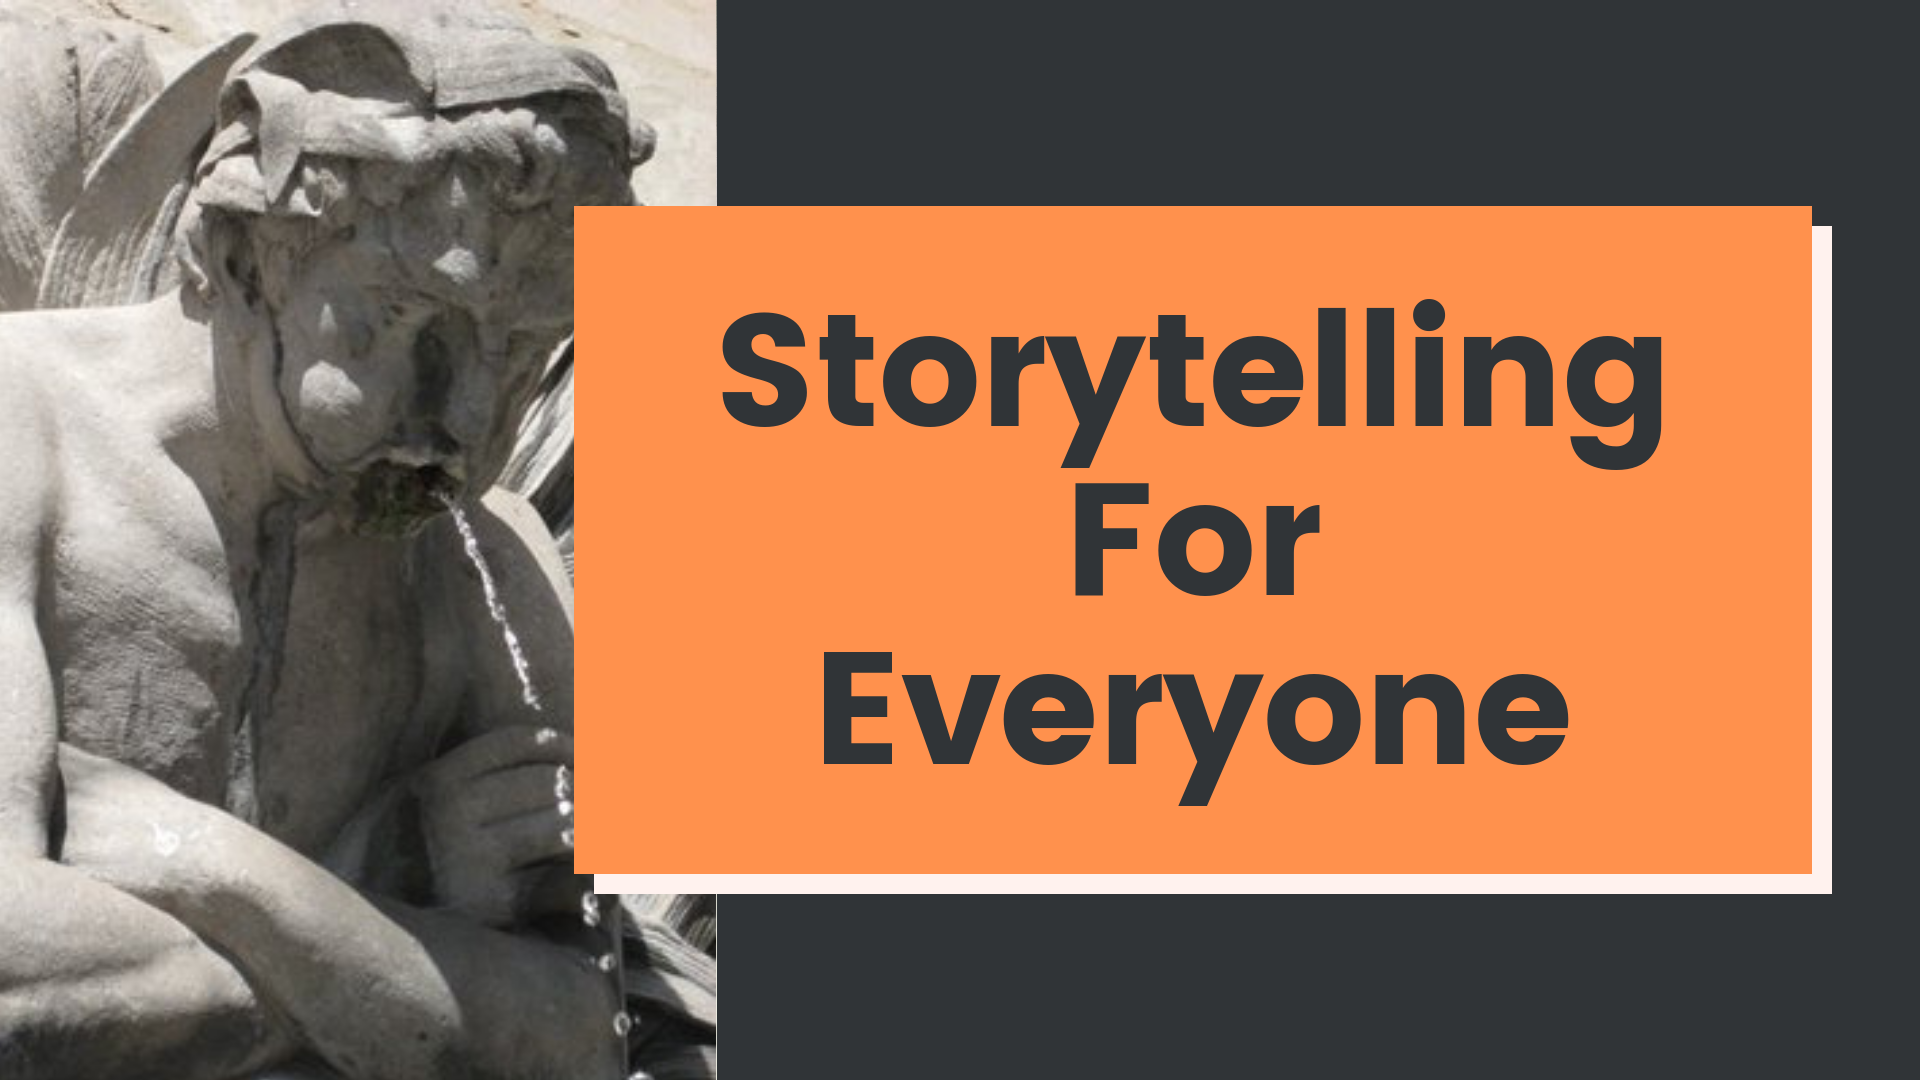 Storytelling For Everyone: Four Week Course in Personal Narrative (ONLINE - MONDAYS IN MAY)